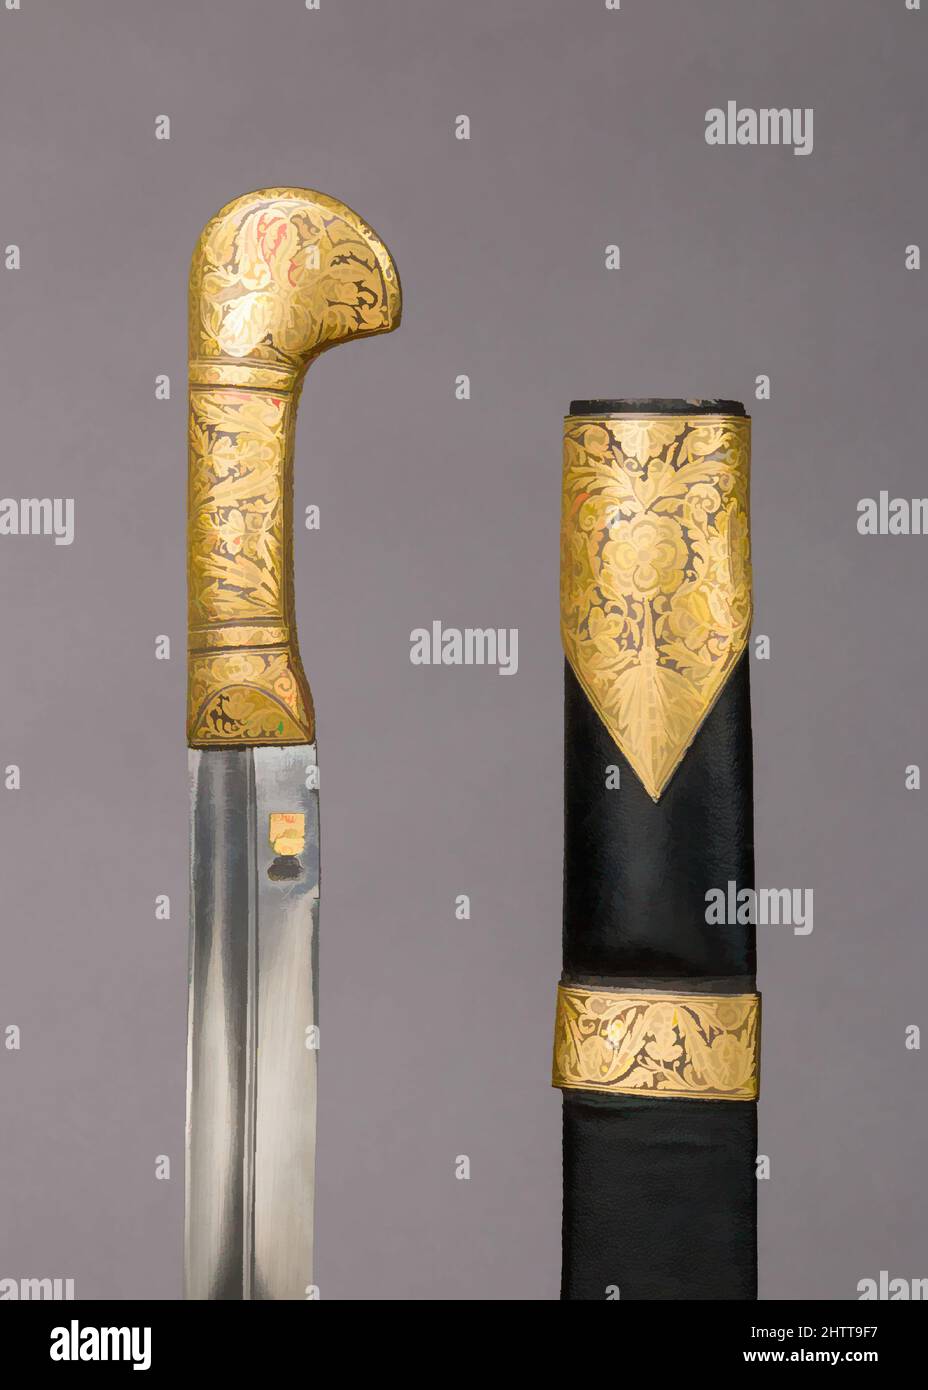 Art inspired by Sword with Sheath, 19th century, Caucasian, Steel, leather, gold, H. with scabbard 39 7/8 in. (101.3 cm); H. without scabbard 37 5/8 in. (95.6 cm); W. 2 1/2 in. (6.4 cm); Wt. 1 lb. 10.6 oz. (754.1 g); Wt. of scabbard 7.9 oz. (224 g); Wt. of strap (c); 4.2 oz. (119.1 g, Classic works modernized by Artotop with a splash of modernity. Shapes, color and value, eye-catching visual impact on art. Emotions through freedom of artworks in a contemporary way. A timeless message pursuing a wildly creative new direction. Artists turning to the digital medium and creating the Artotop NFT Stock Photo